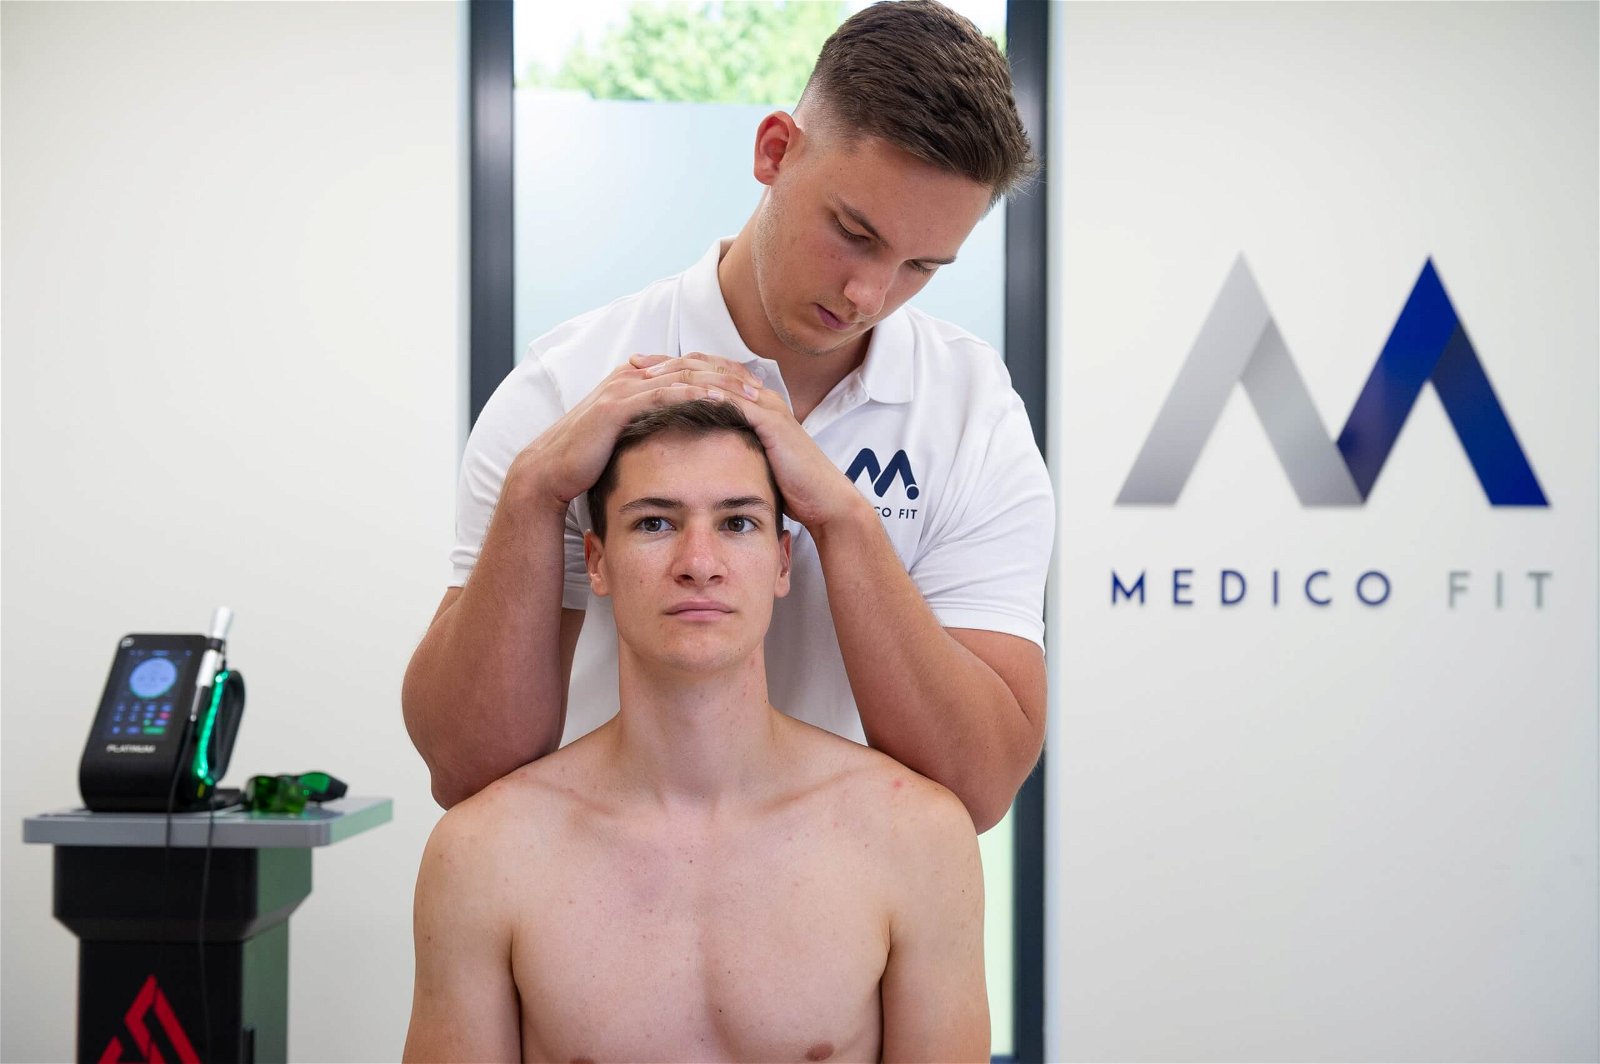 neck physiotherapy at medicofit clinic